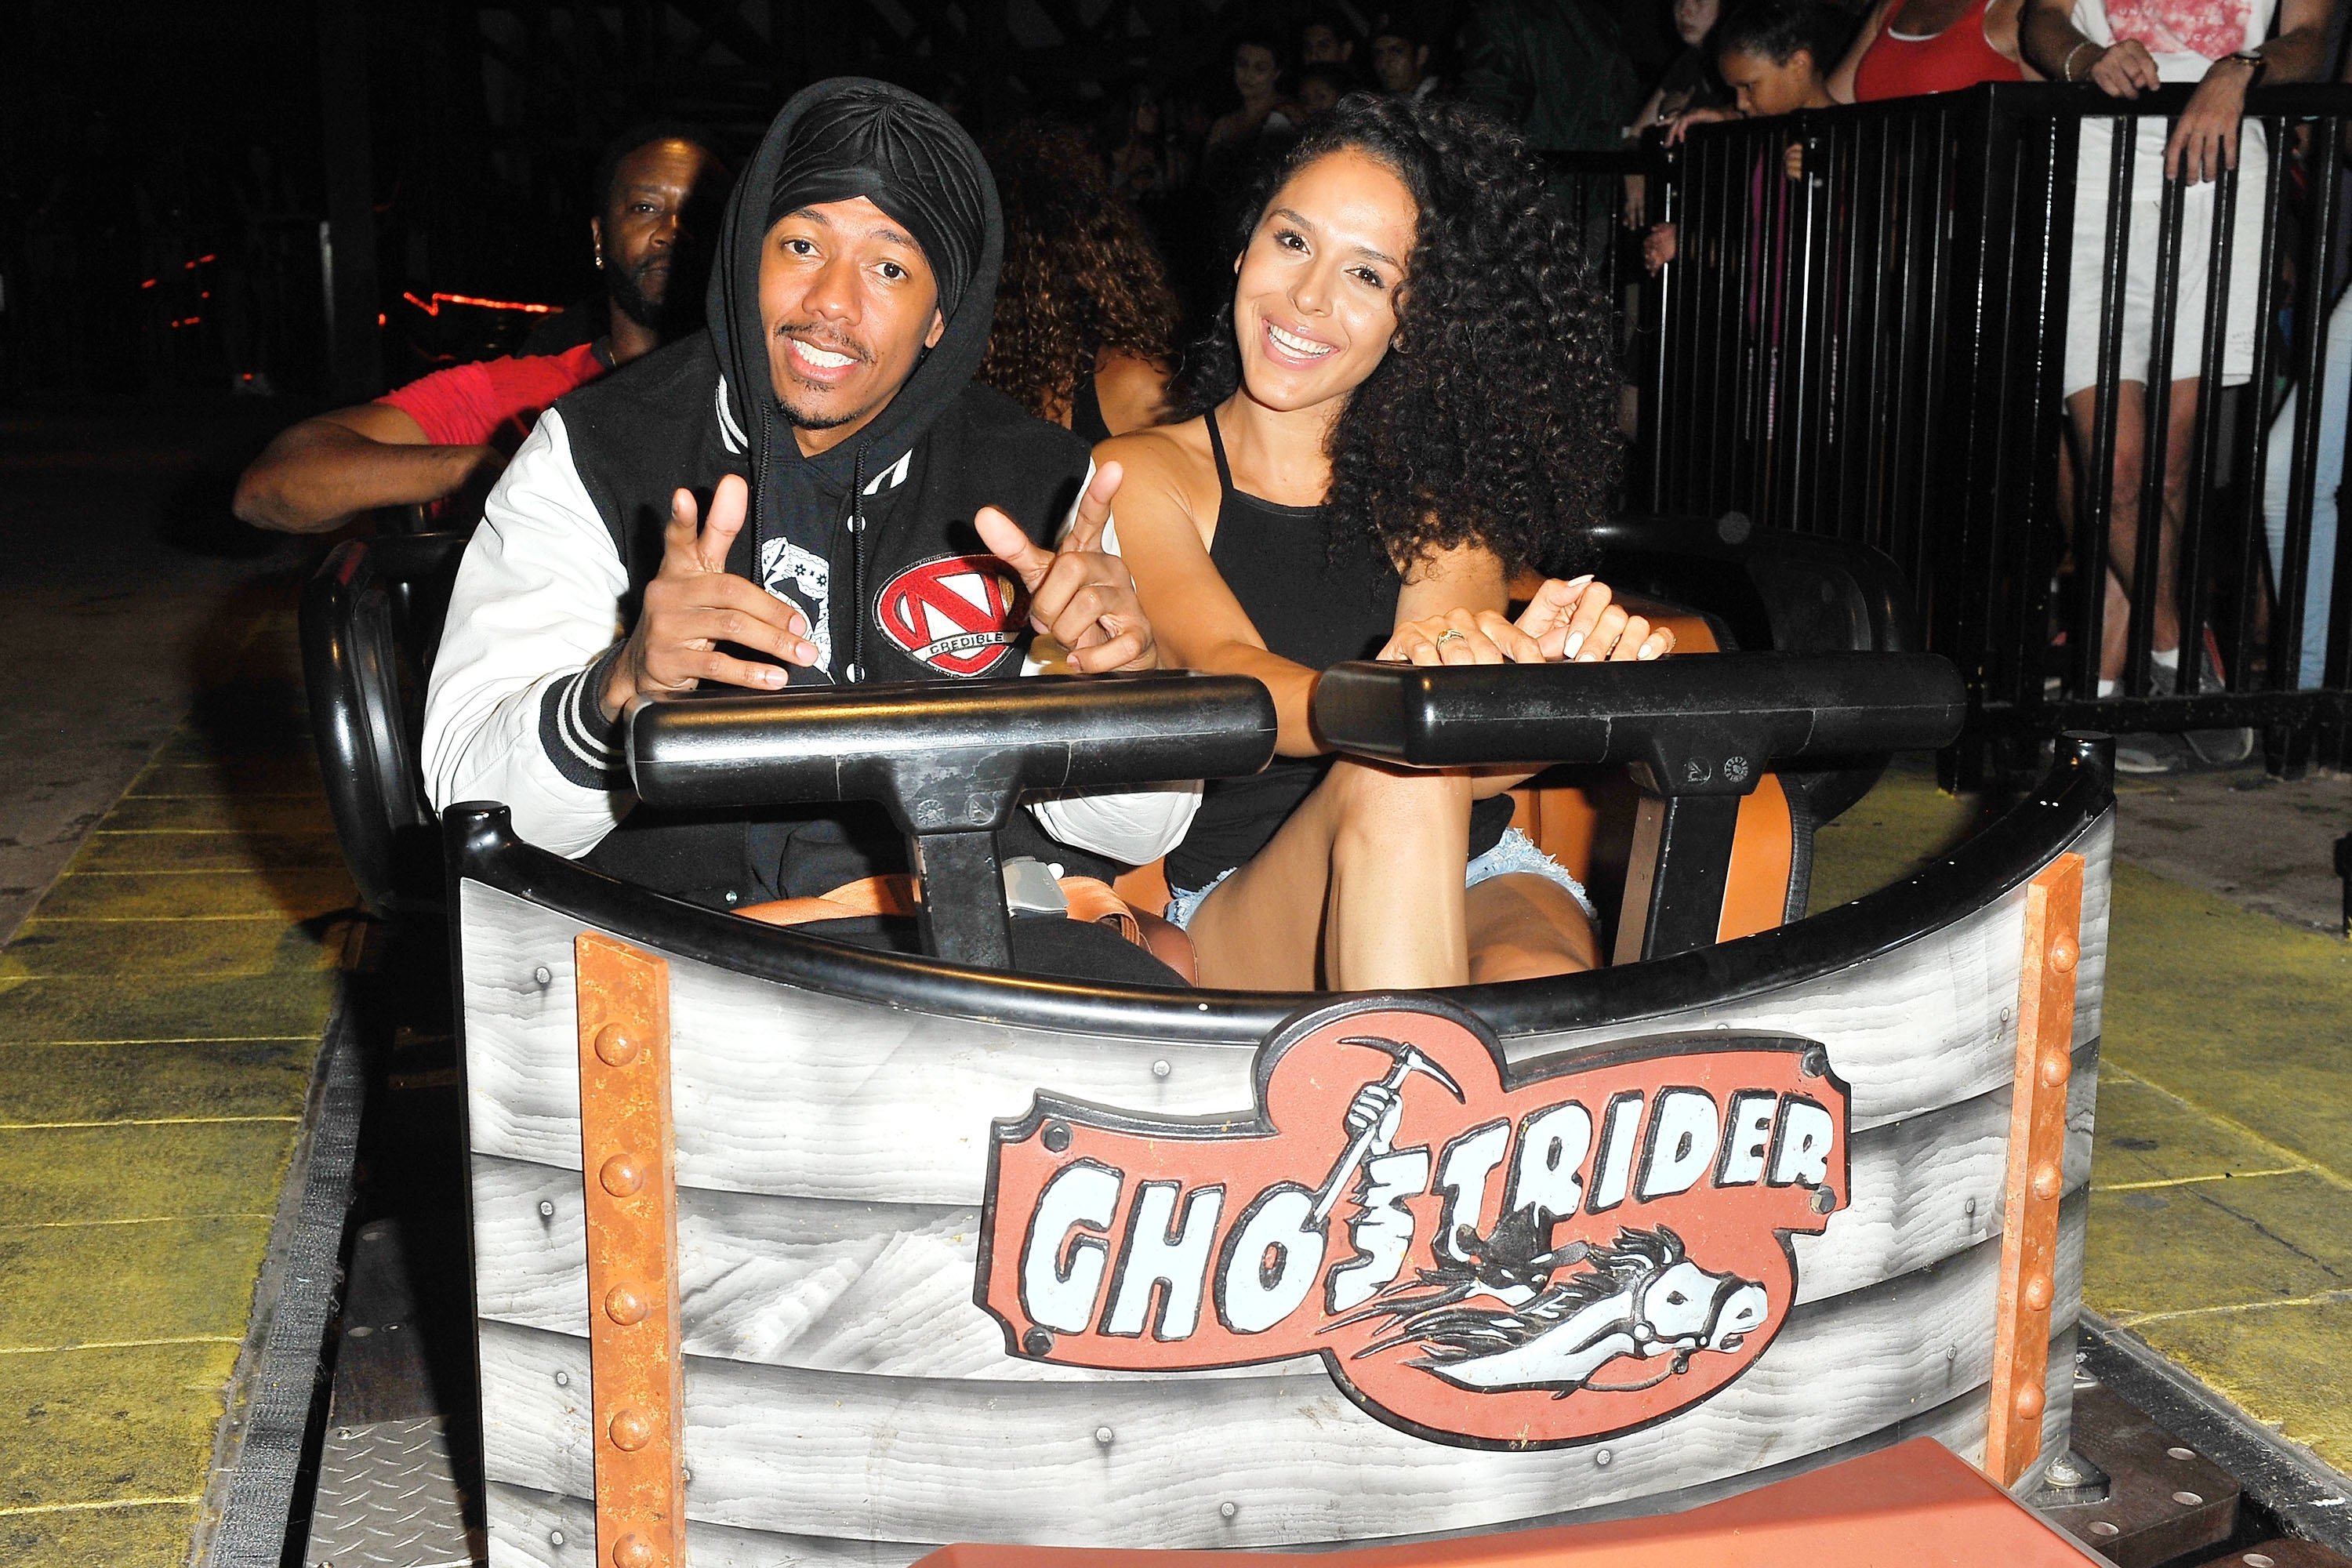 Nick Cannon with the mother of his third child, Brittany Bell at Knotts Berry Farm in September 2017. | Photo: Getty Images